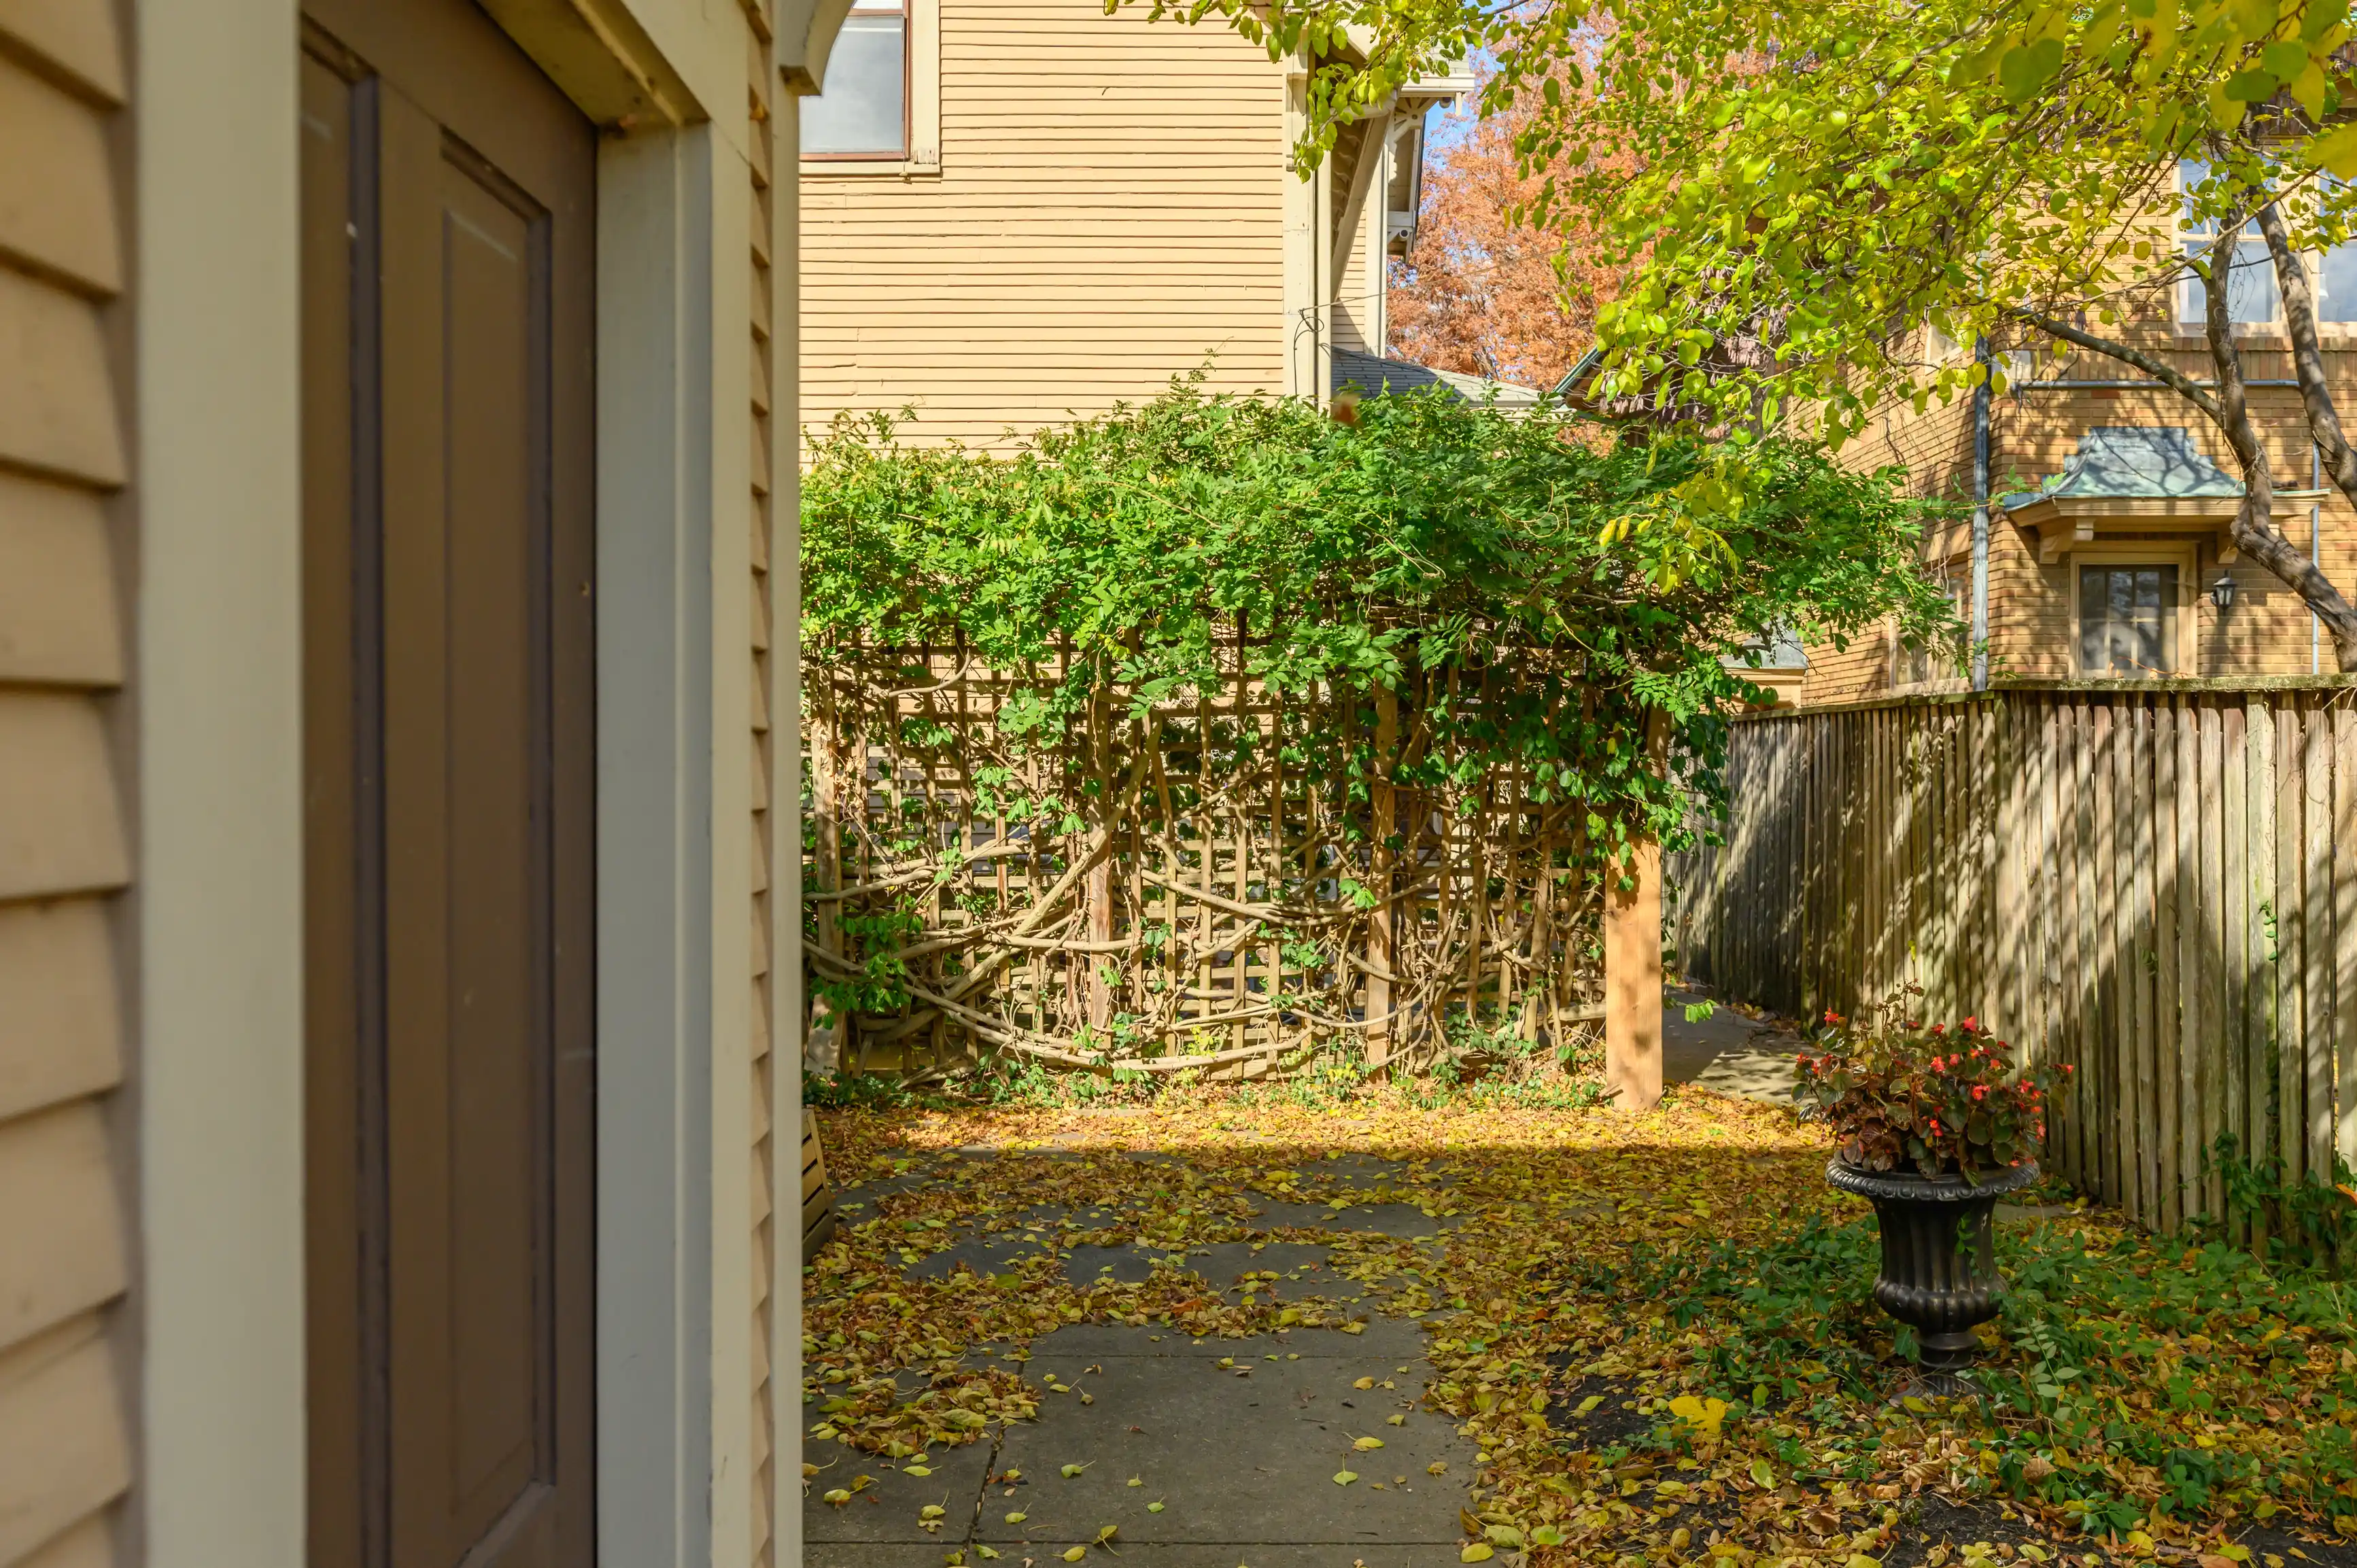 A sunny backyard with fallen yellow leaves on the ground, a mature tree, a trellis covered in vines, and a wooden fence, with a part of a house visible to the left.